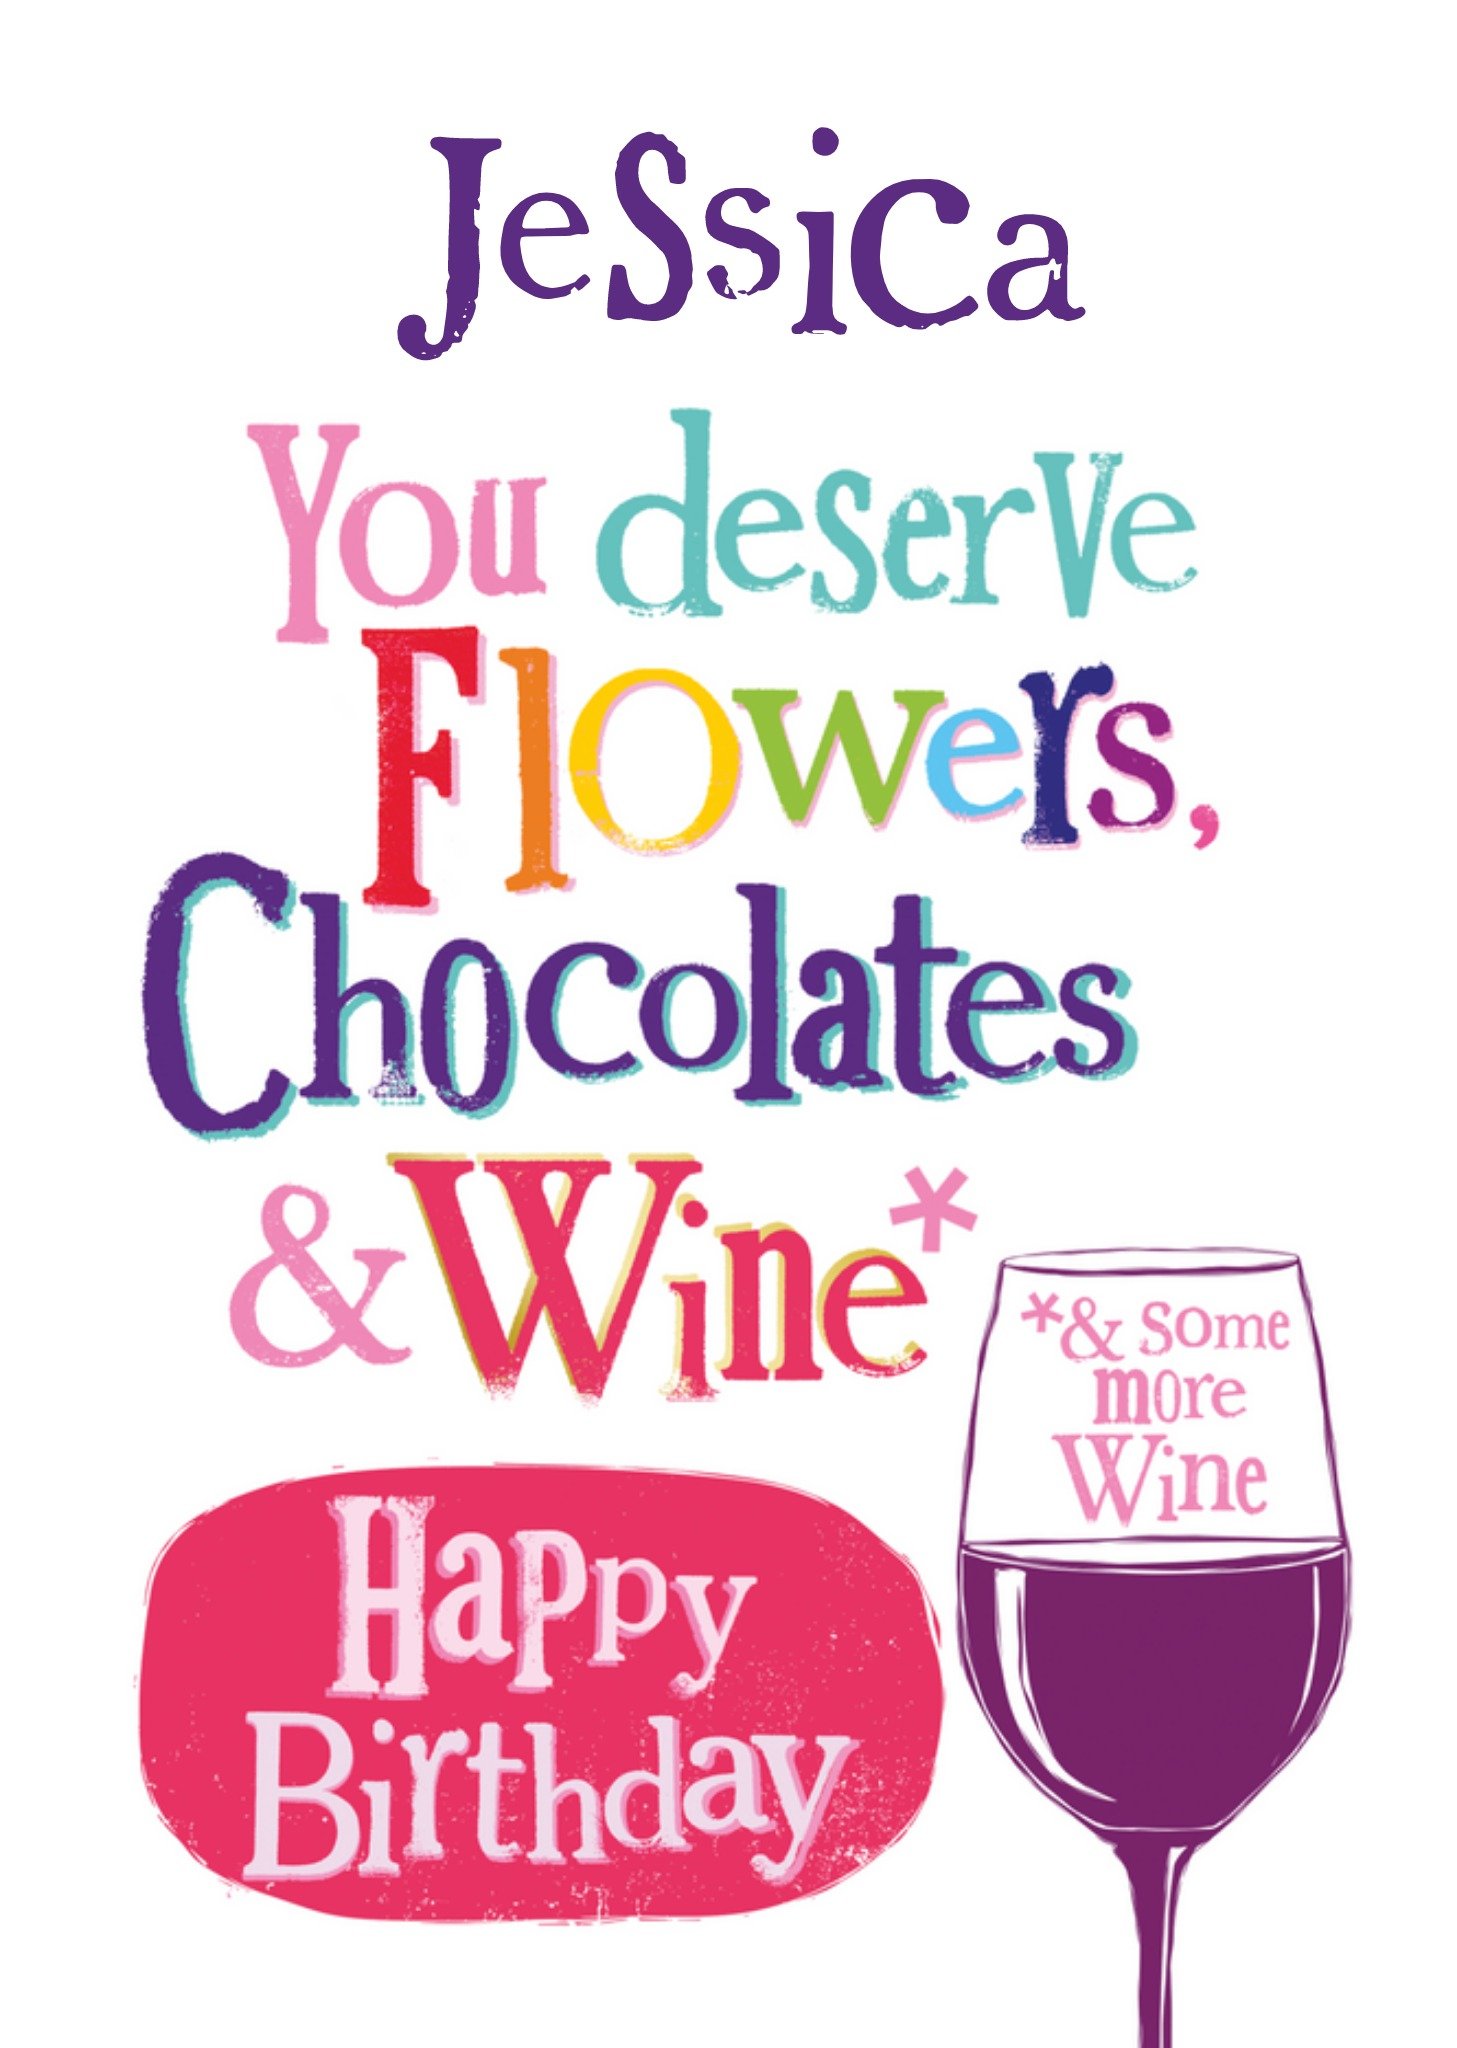 Moonpig The Bright Side You Deserve Flowers Chocolates And Wine And Some More Wine Typography Birthd